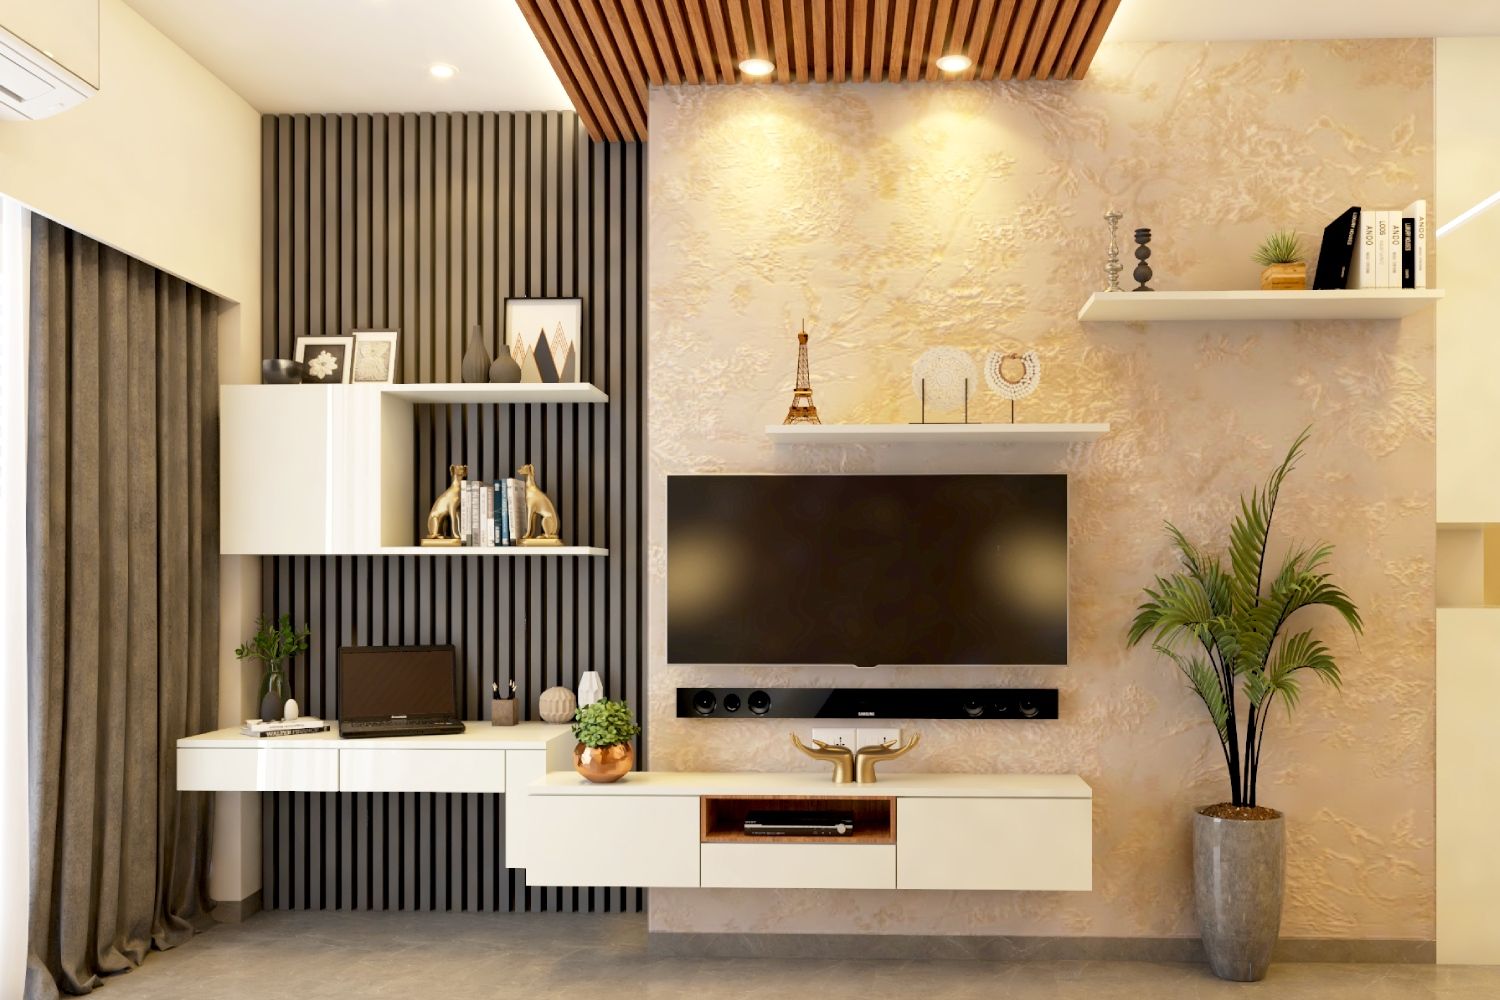 Contemporary Frosty White TV Unit Design with Wall-Mounted Cabinet and Open Rack